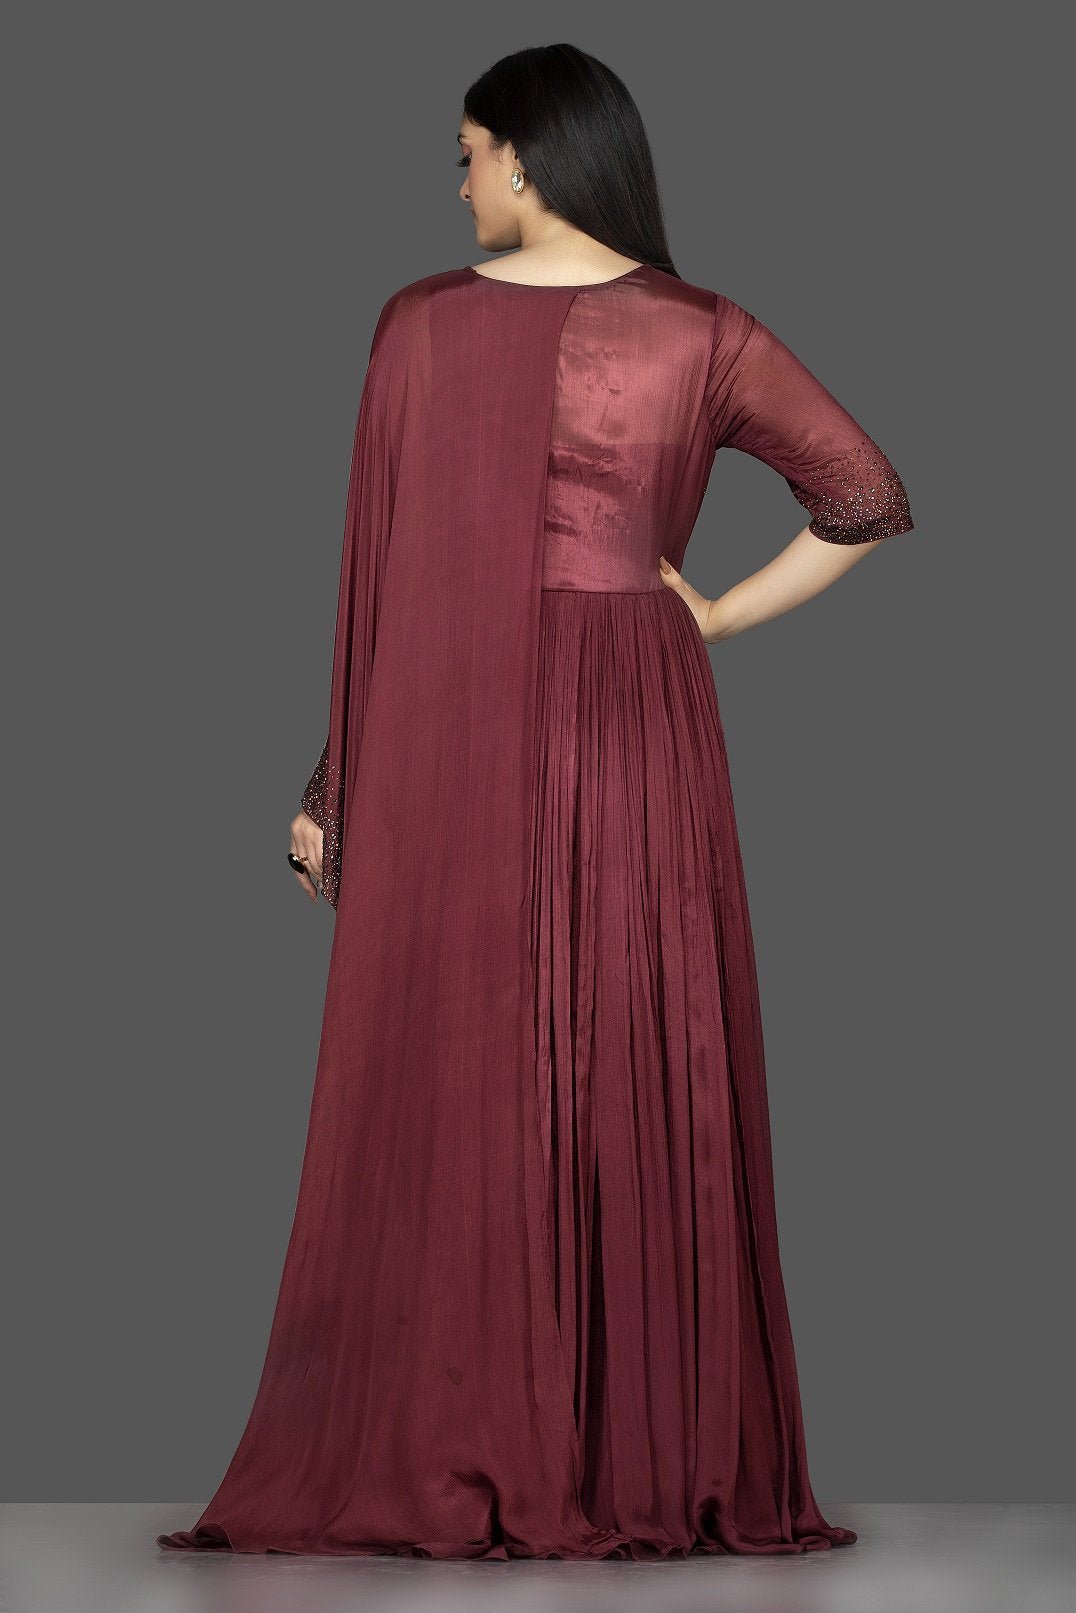 Buy stunning maroon embroidered satin silk cape gown online in USA. Flaunt your extraordinary fashion sense with stunning Indian dresses, designer gowns from Pure Elegance Indian fashion store in USA.-back